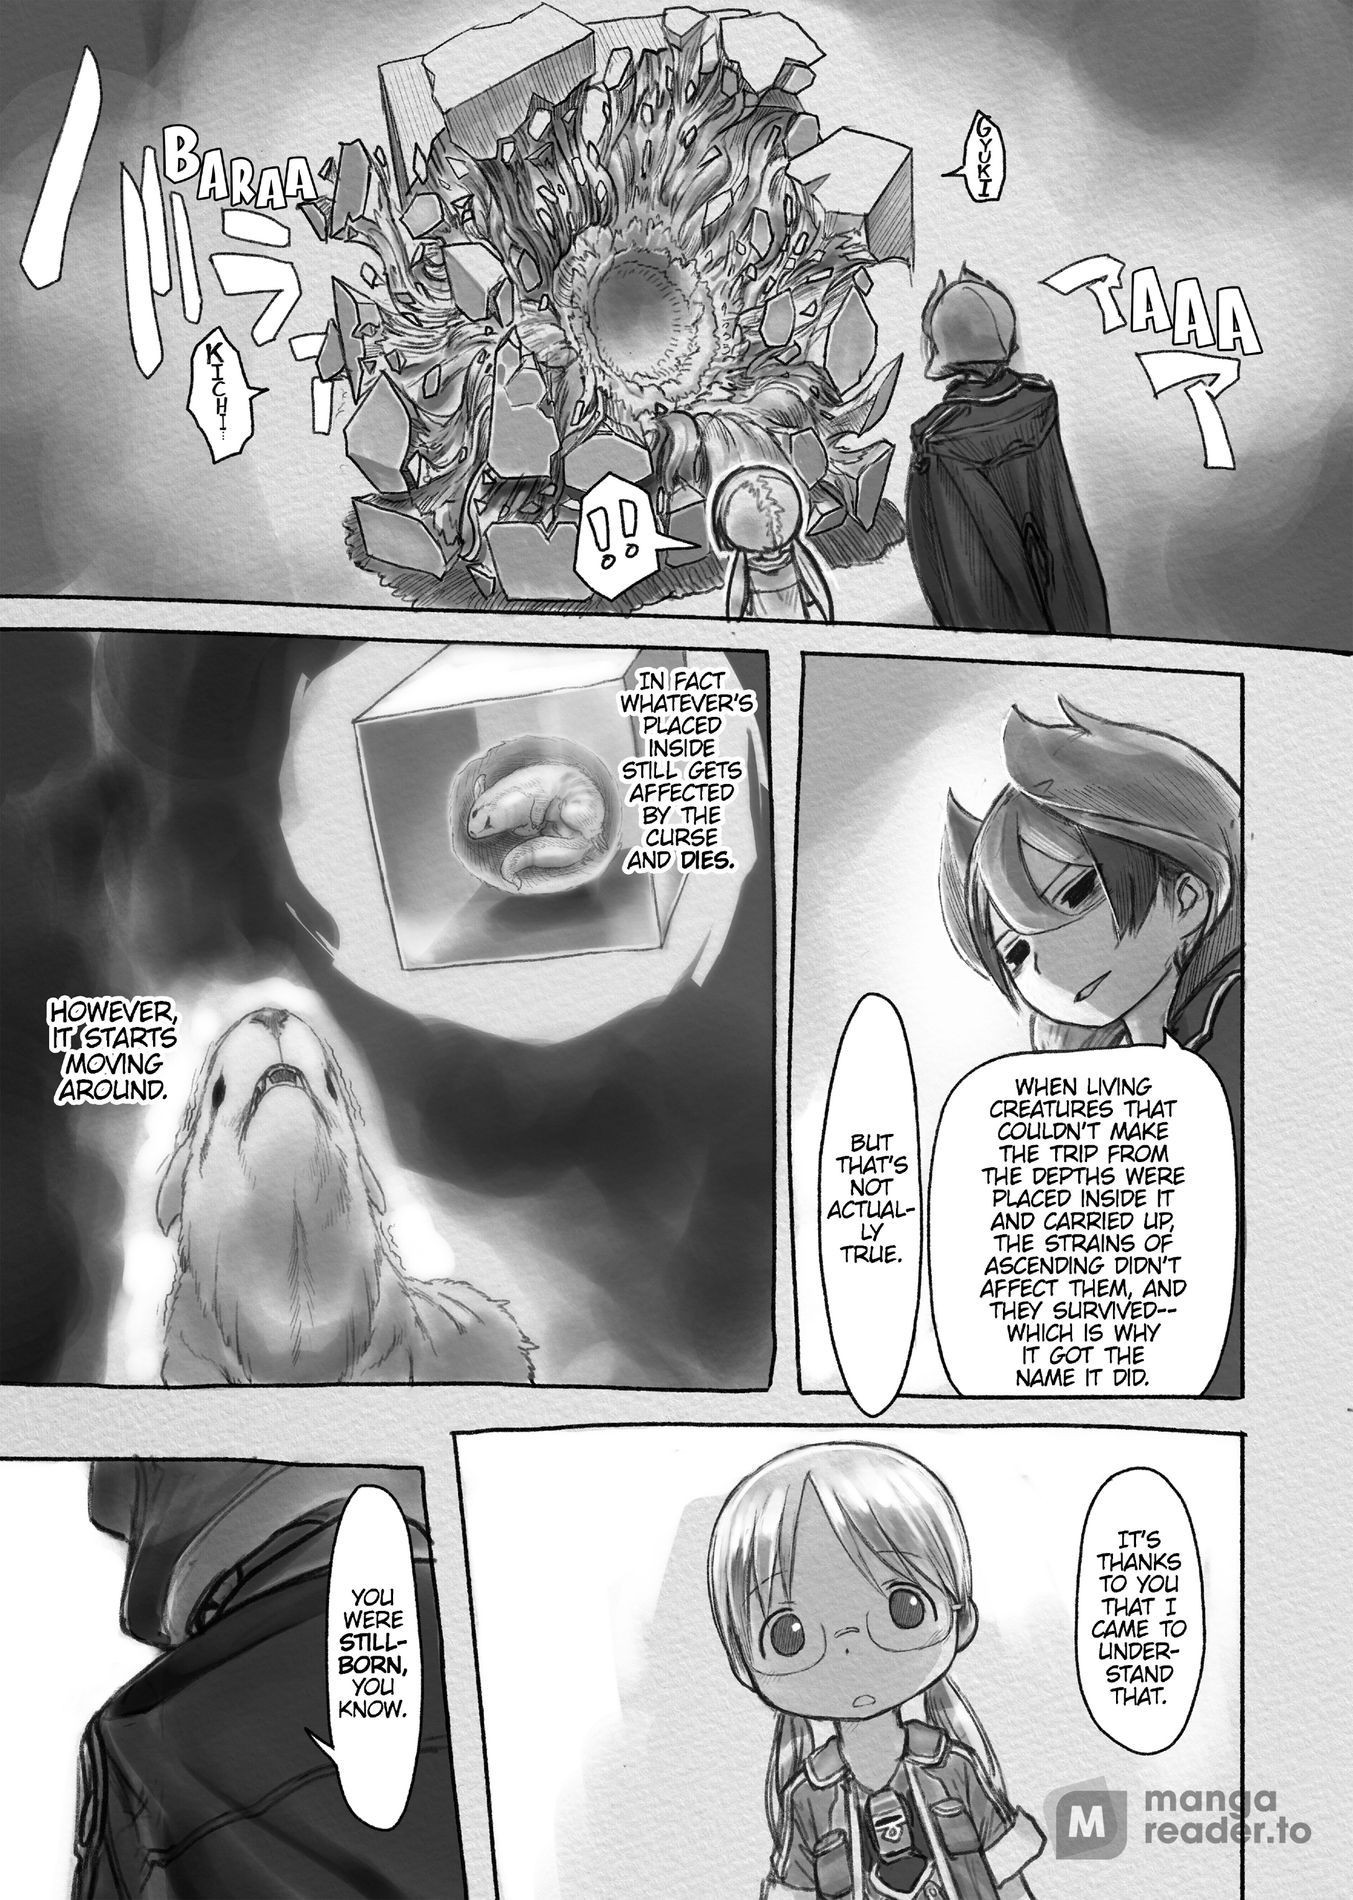 Made In Abyss - Chapter 14 - Made in Abyss Manga Online